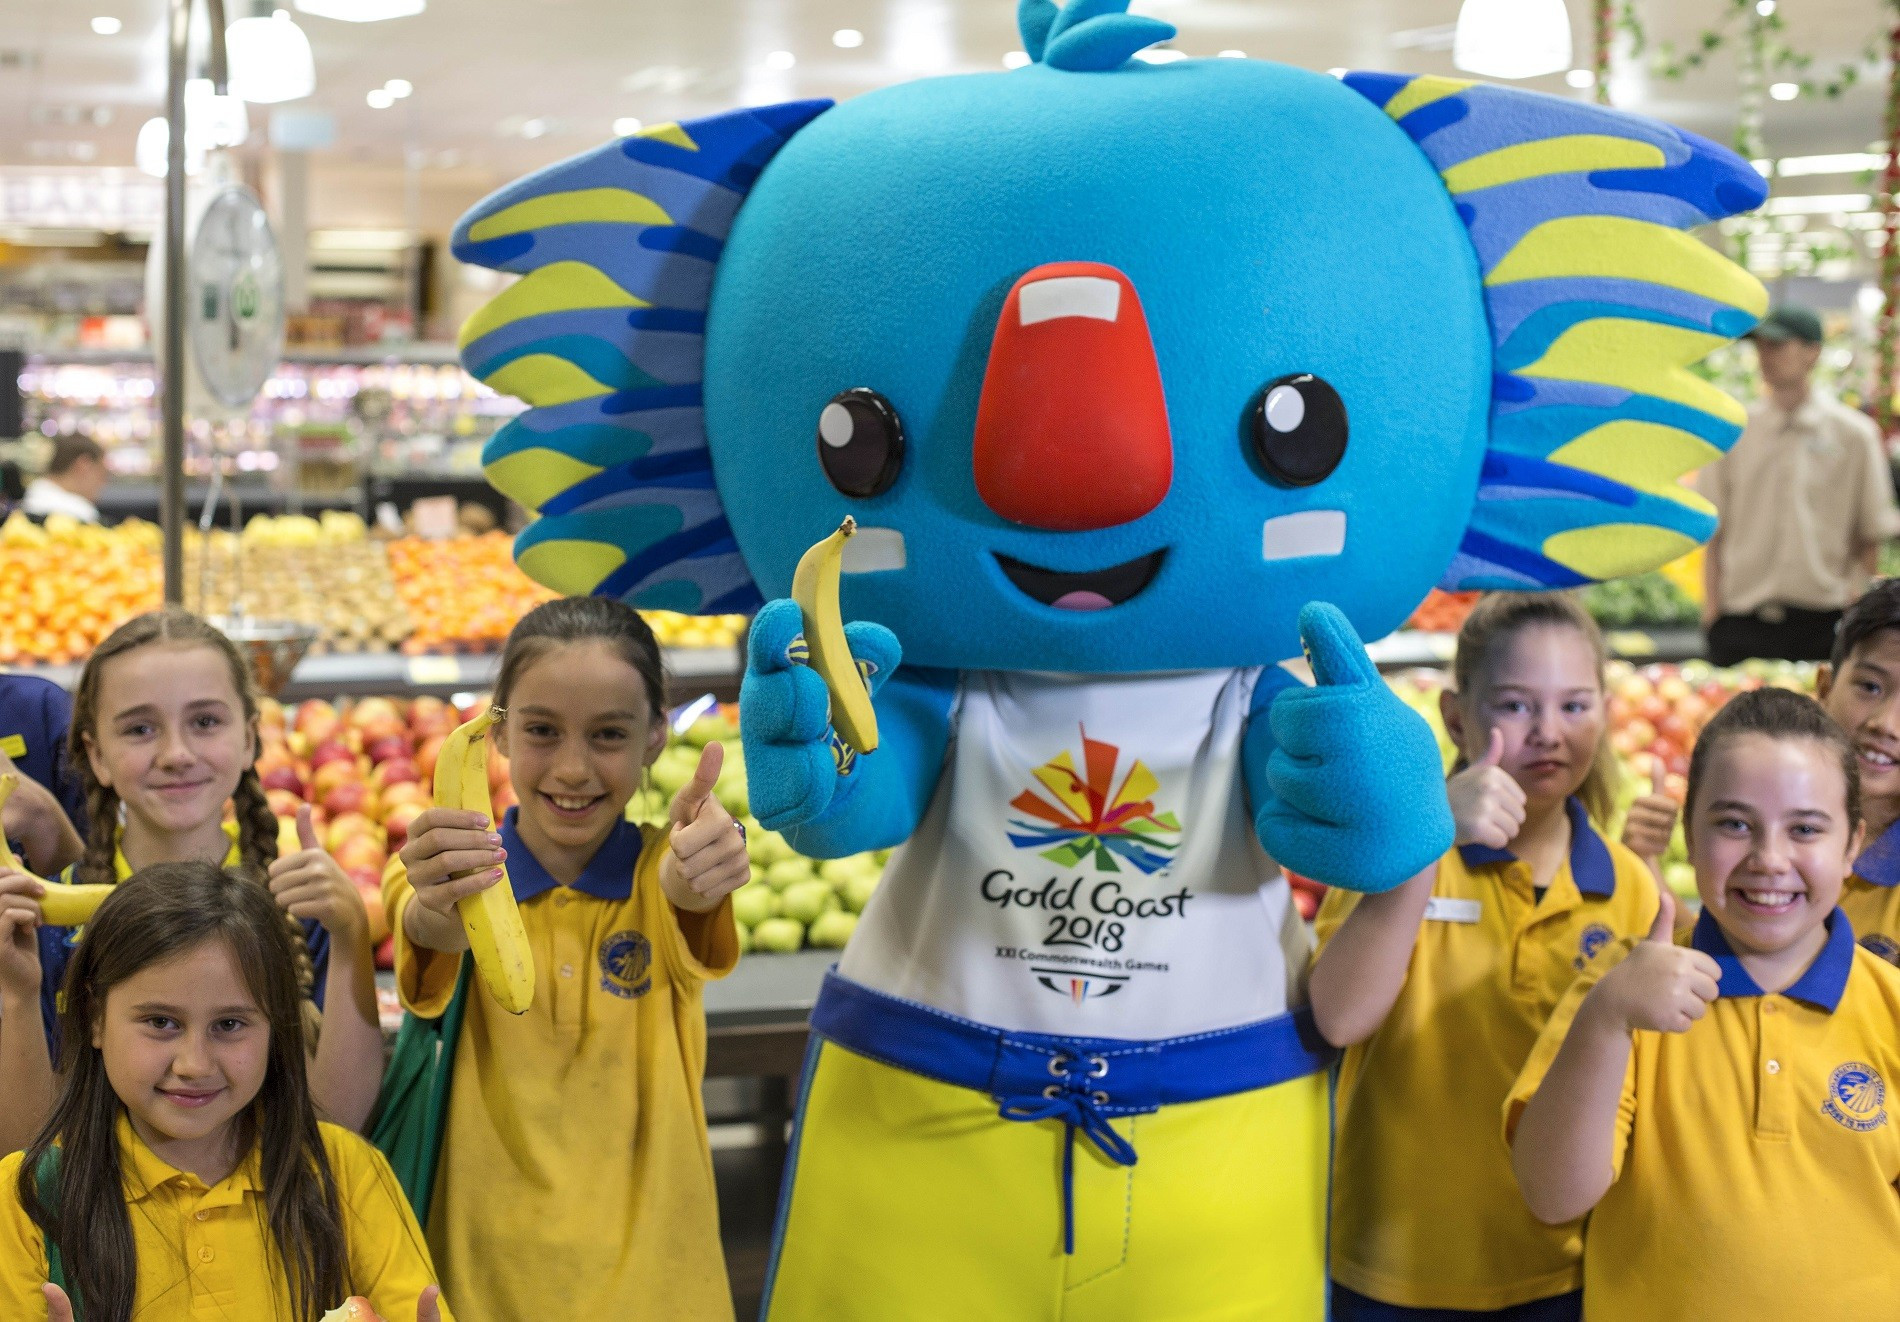 The supermarket chain become the latest company to partner with Gold Coast 2018 ©Gold Coast 2018